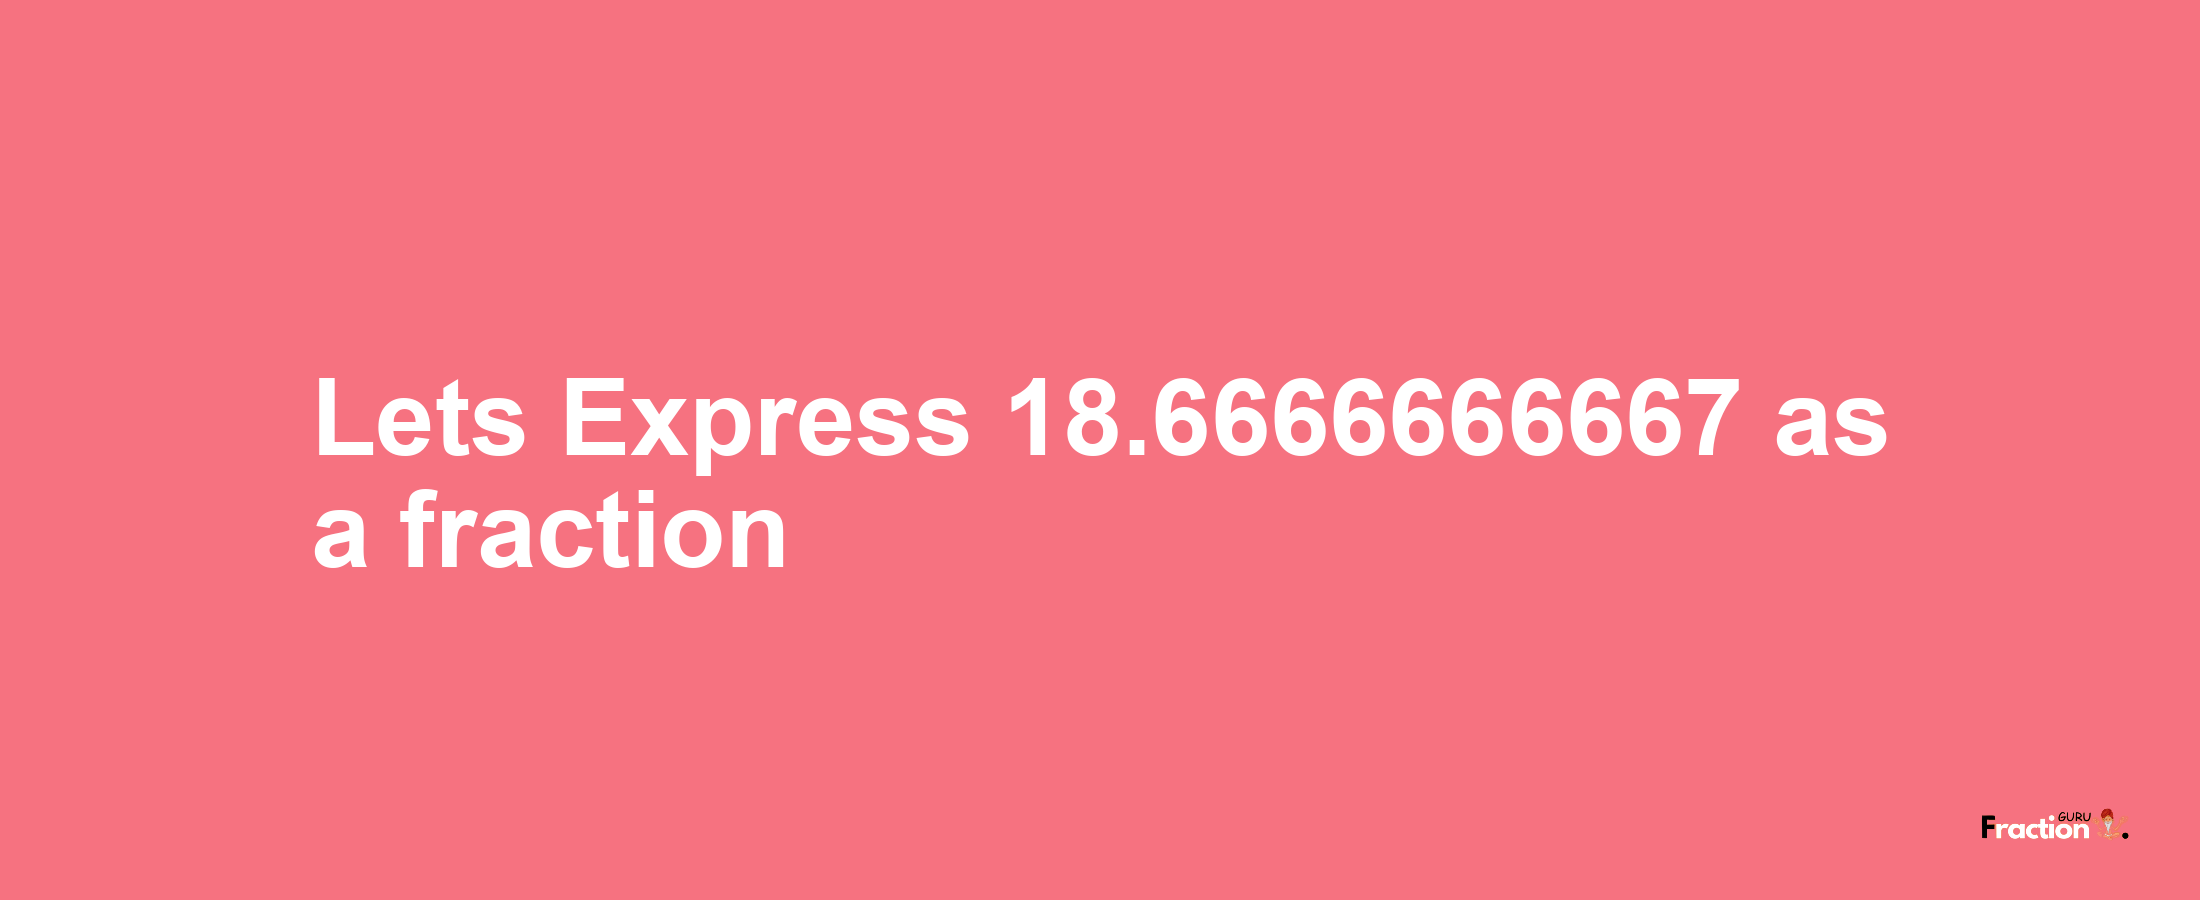 Lets Express 18.6666666667 as afraction